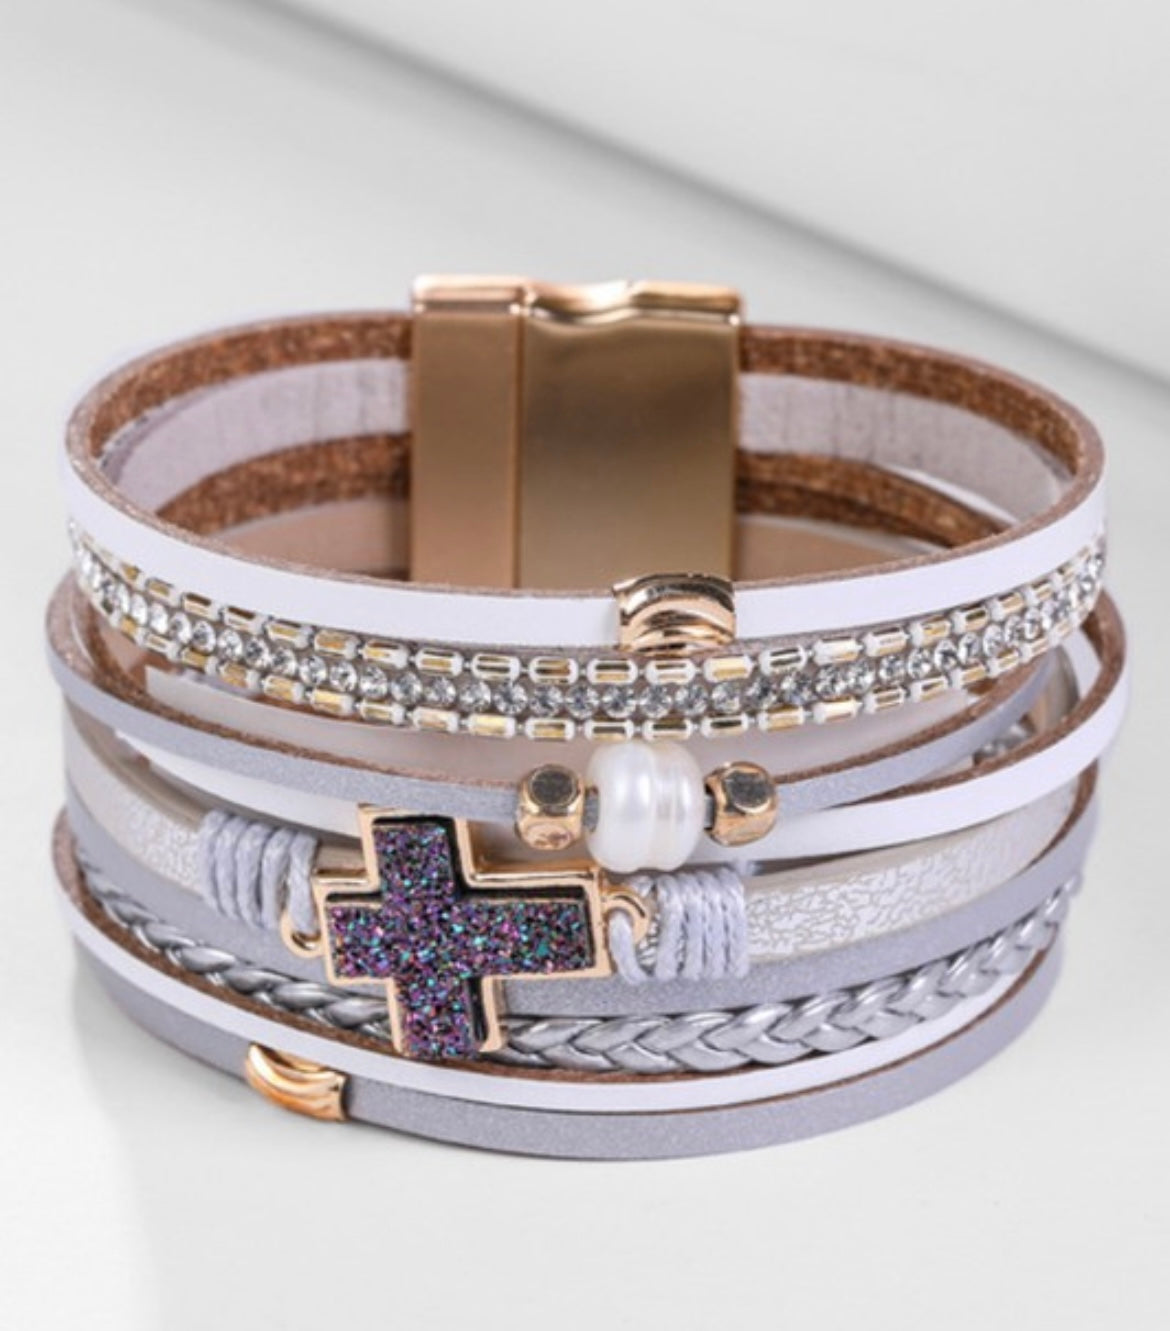 Multi strand leather bracelet with cross accent